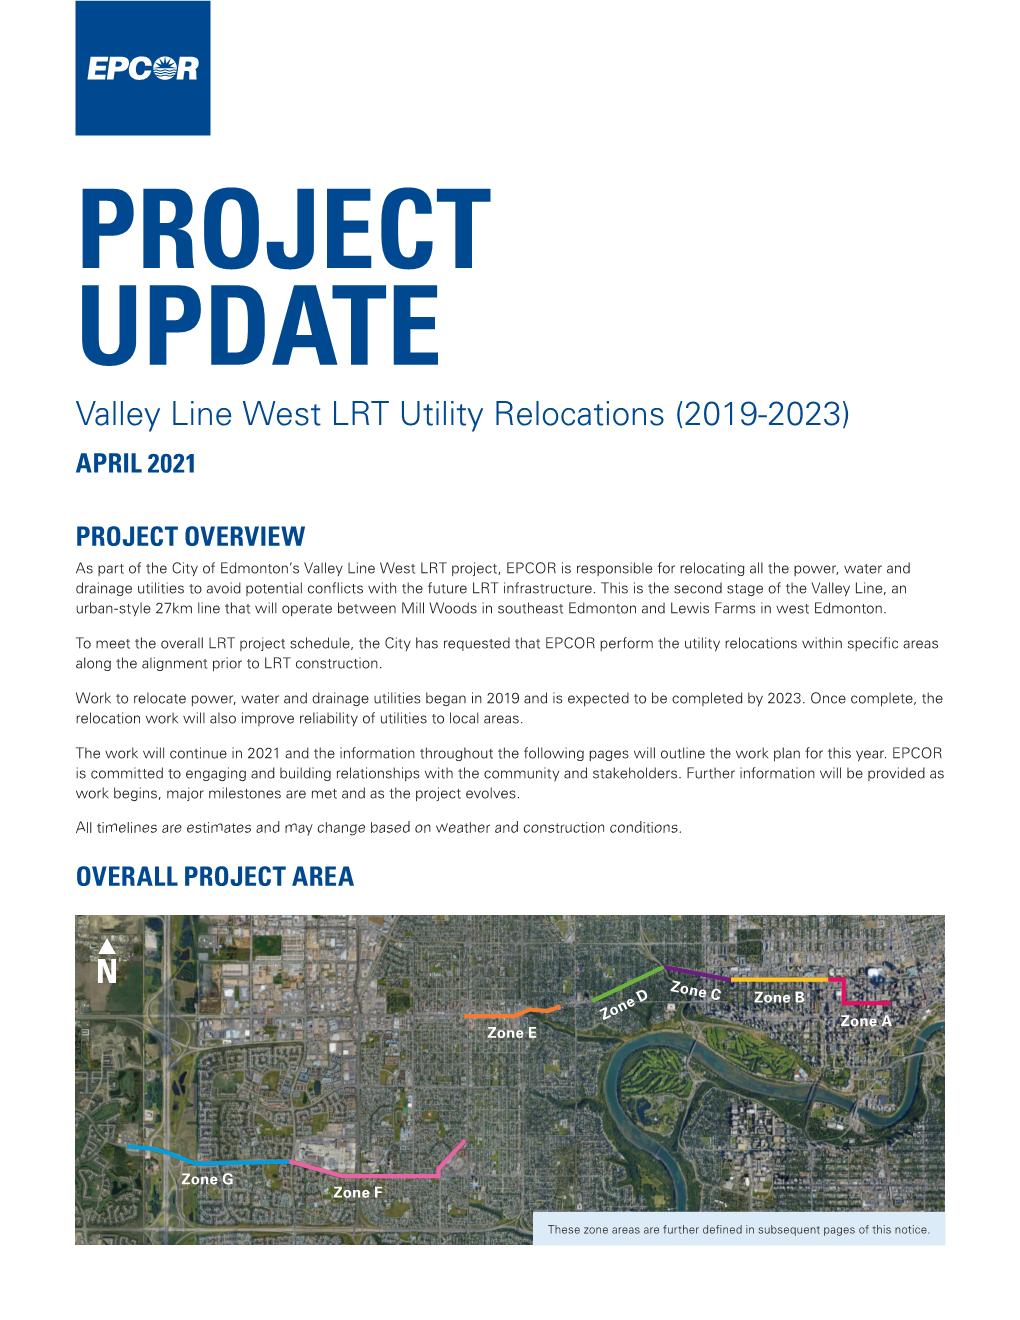 PROJECT UPDATE Valley Line West LRT Utility Relocations (2019-2023) APRIL 2021